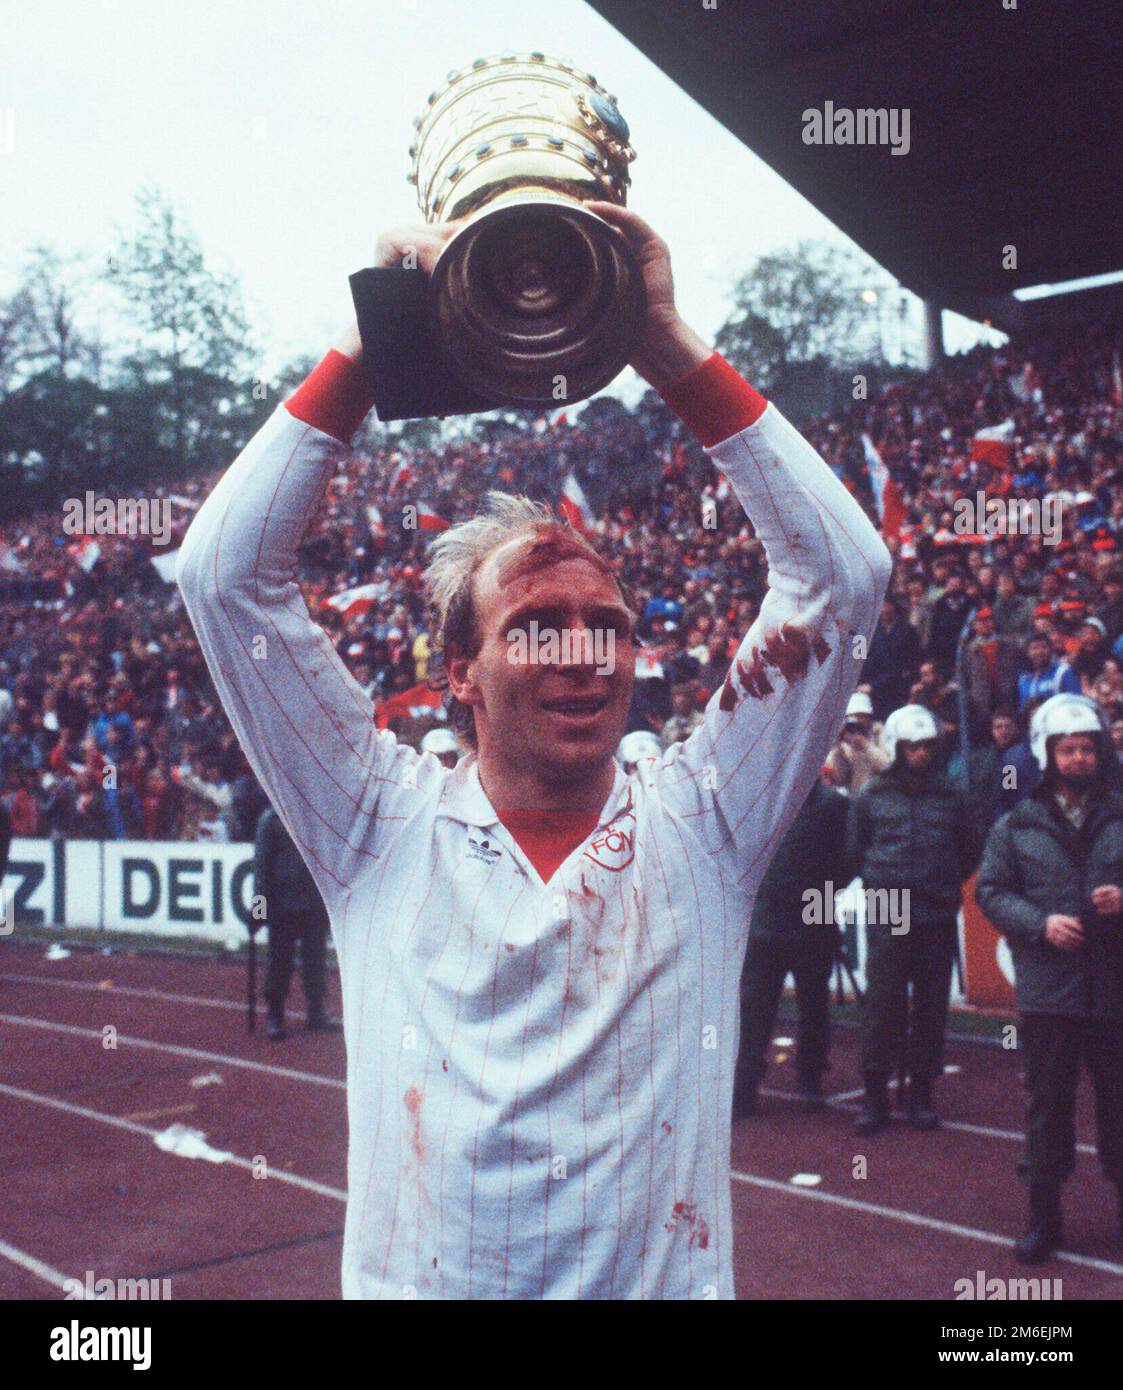 ARCHIVE PHOTO: Dieter Hoeness celebrates his 70th birthday on January 7, 2023, 10SN D Hoeness010582SP.jpg DFB Pokal final in Frankfurt, FC Bayern Munich: 1.FC Nuremberg 4:2, Dieter Hoeness with blood-crusted forehead and blood-smeared shirt, holds the DFB Pokal high; Half figure, Hf. SVEN SIMON, Huyssenallee 40-42, 45128 E ssen#tel.0201/23 45 56#fax 0201/23 45 39#account 1428150 Commerzbank E ssen BLZ 36040039. Stock Photo